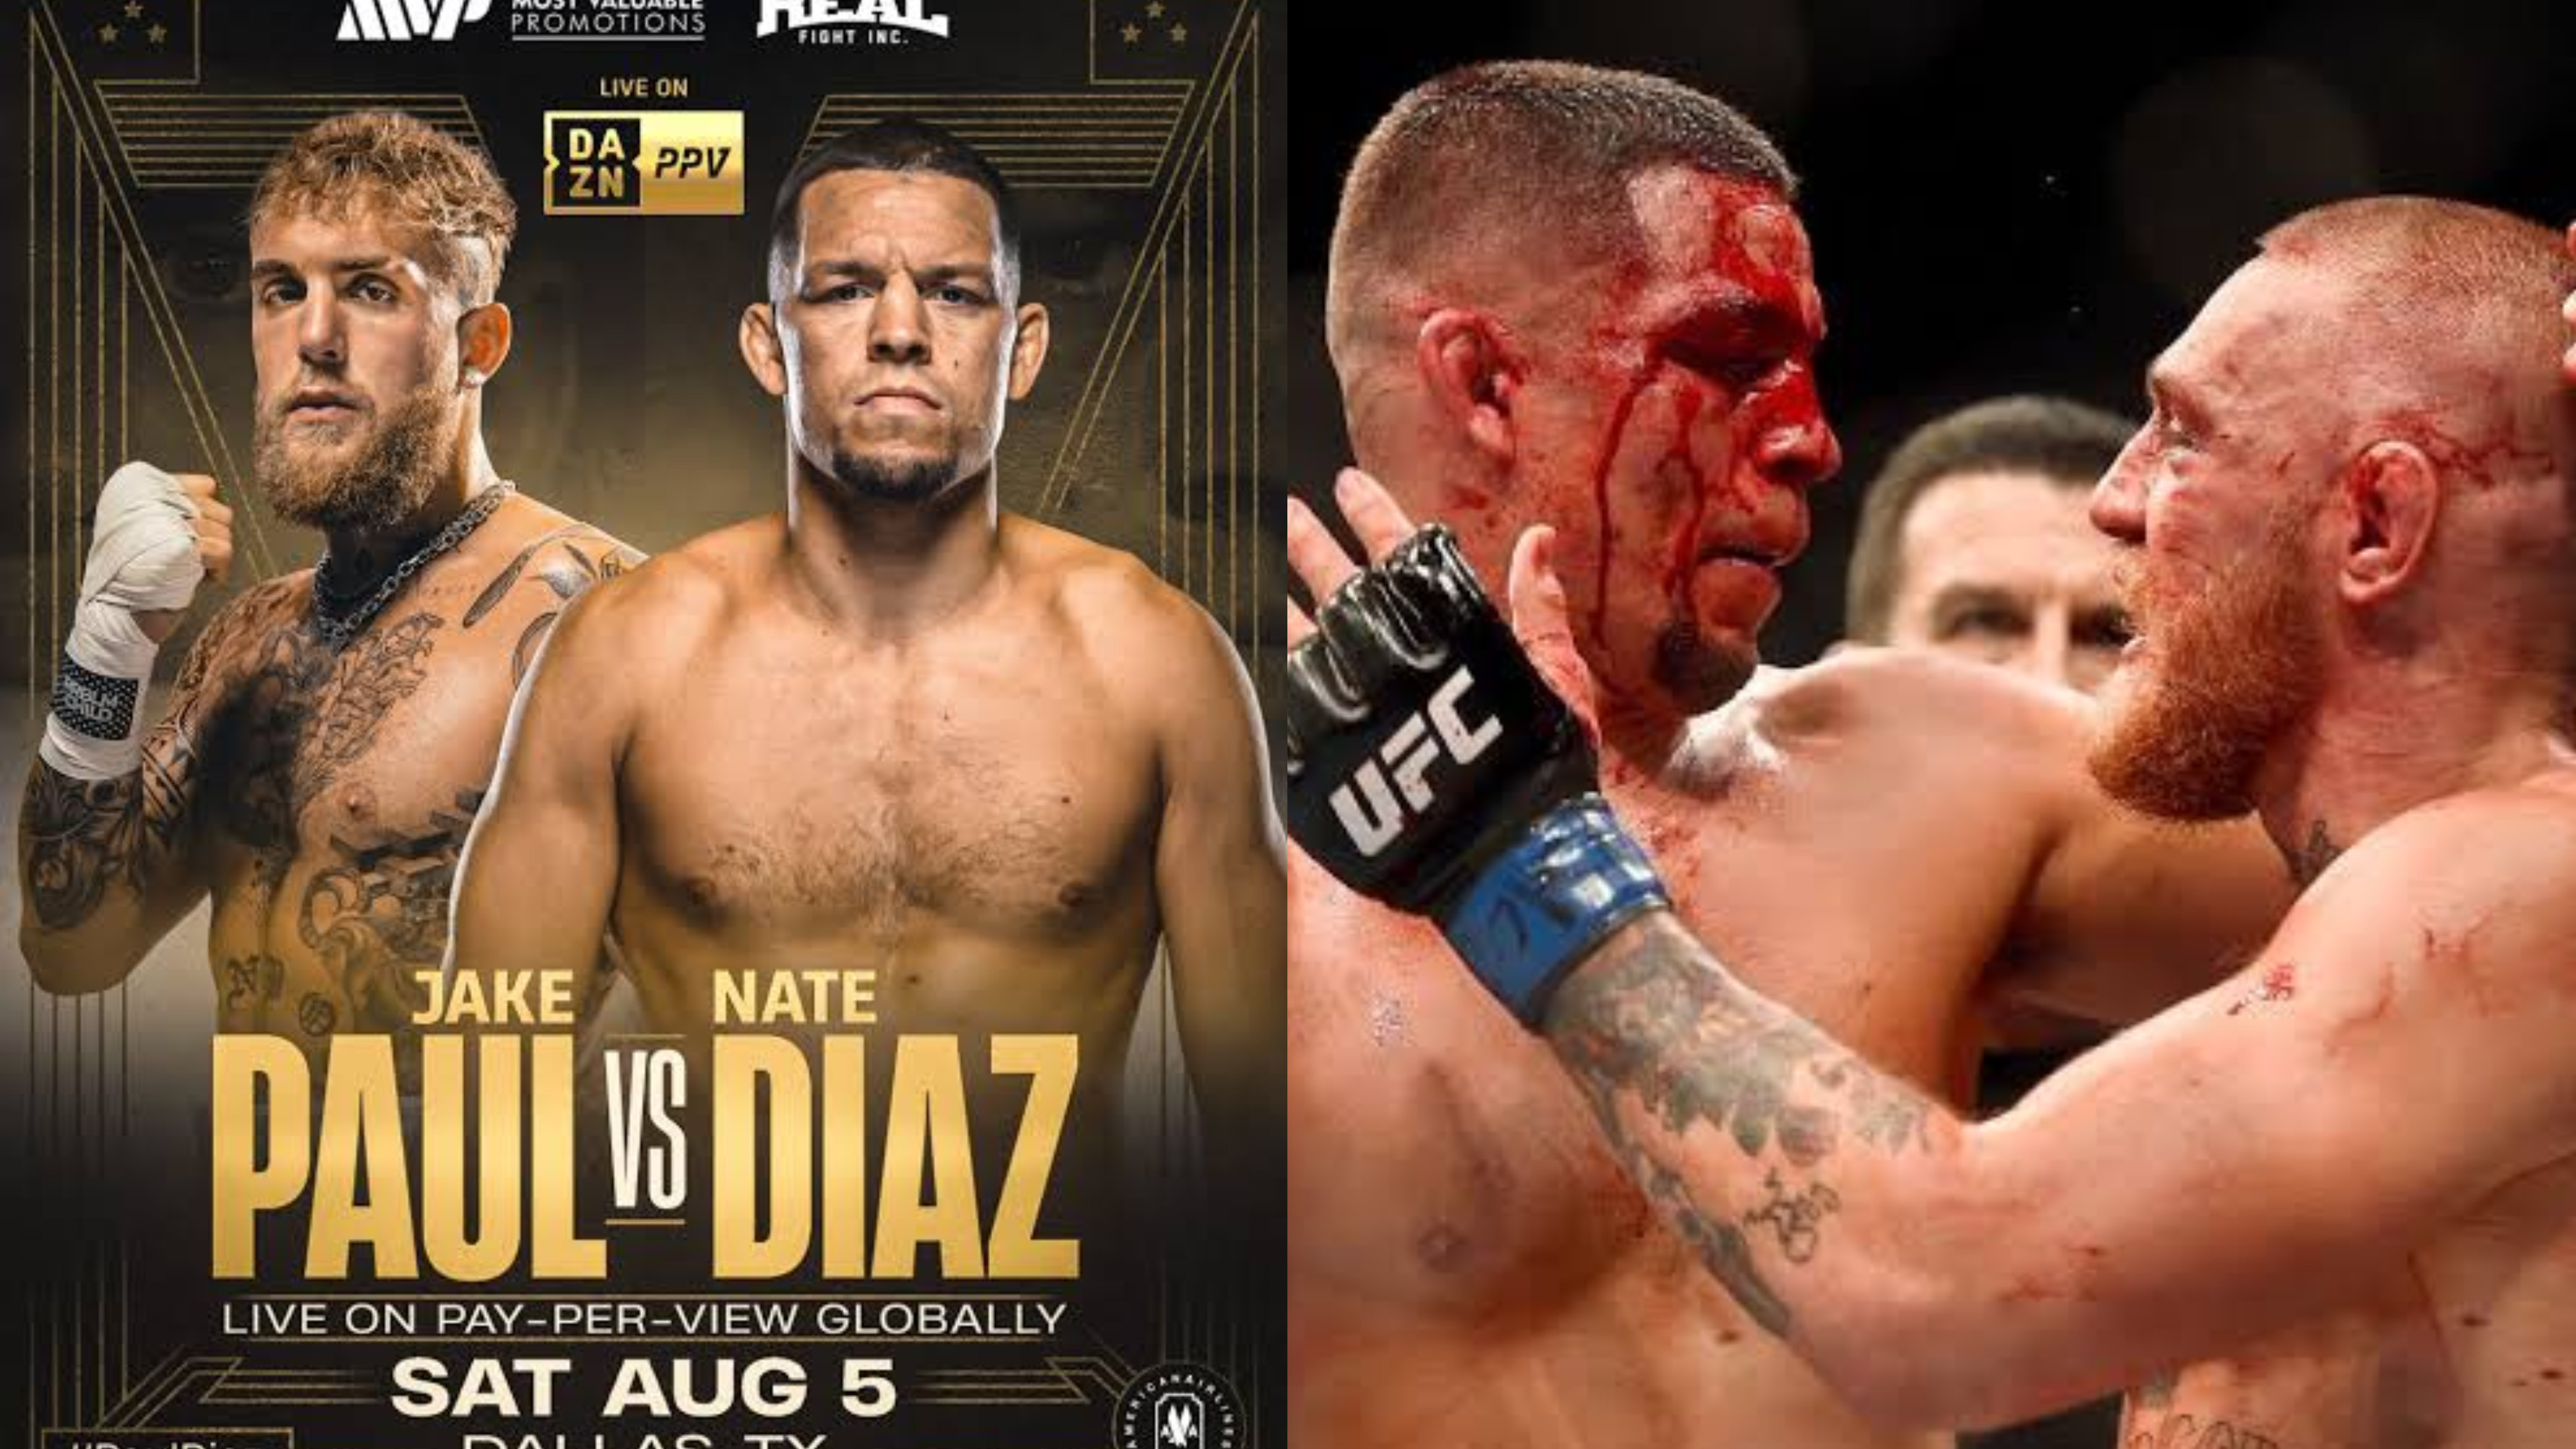 Paul vs Diaz Can Nate Diaz earn more money against Jake Paul than his UFC pay against Conor McGregor?